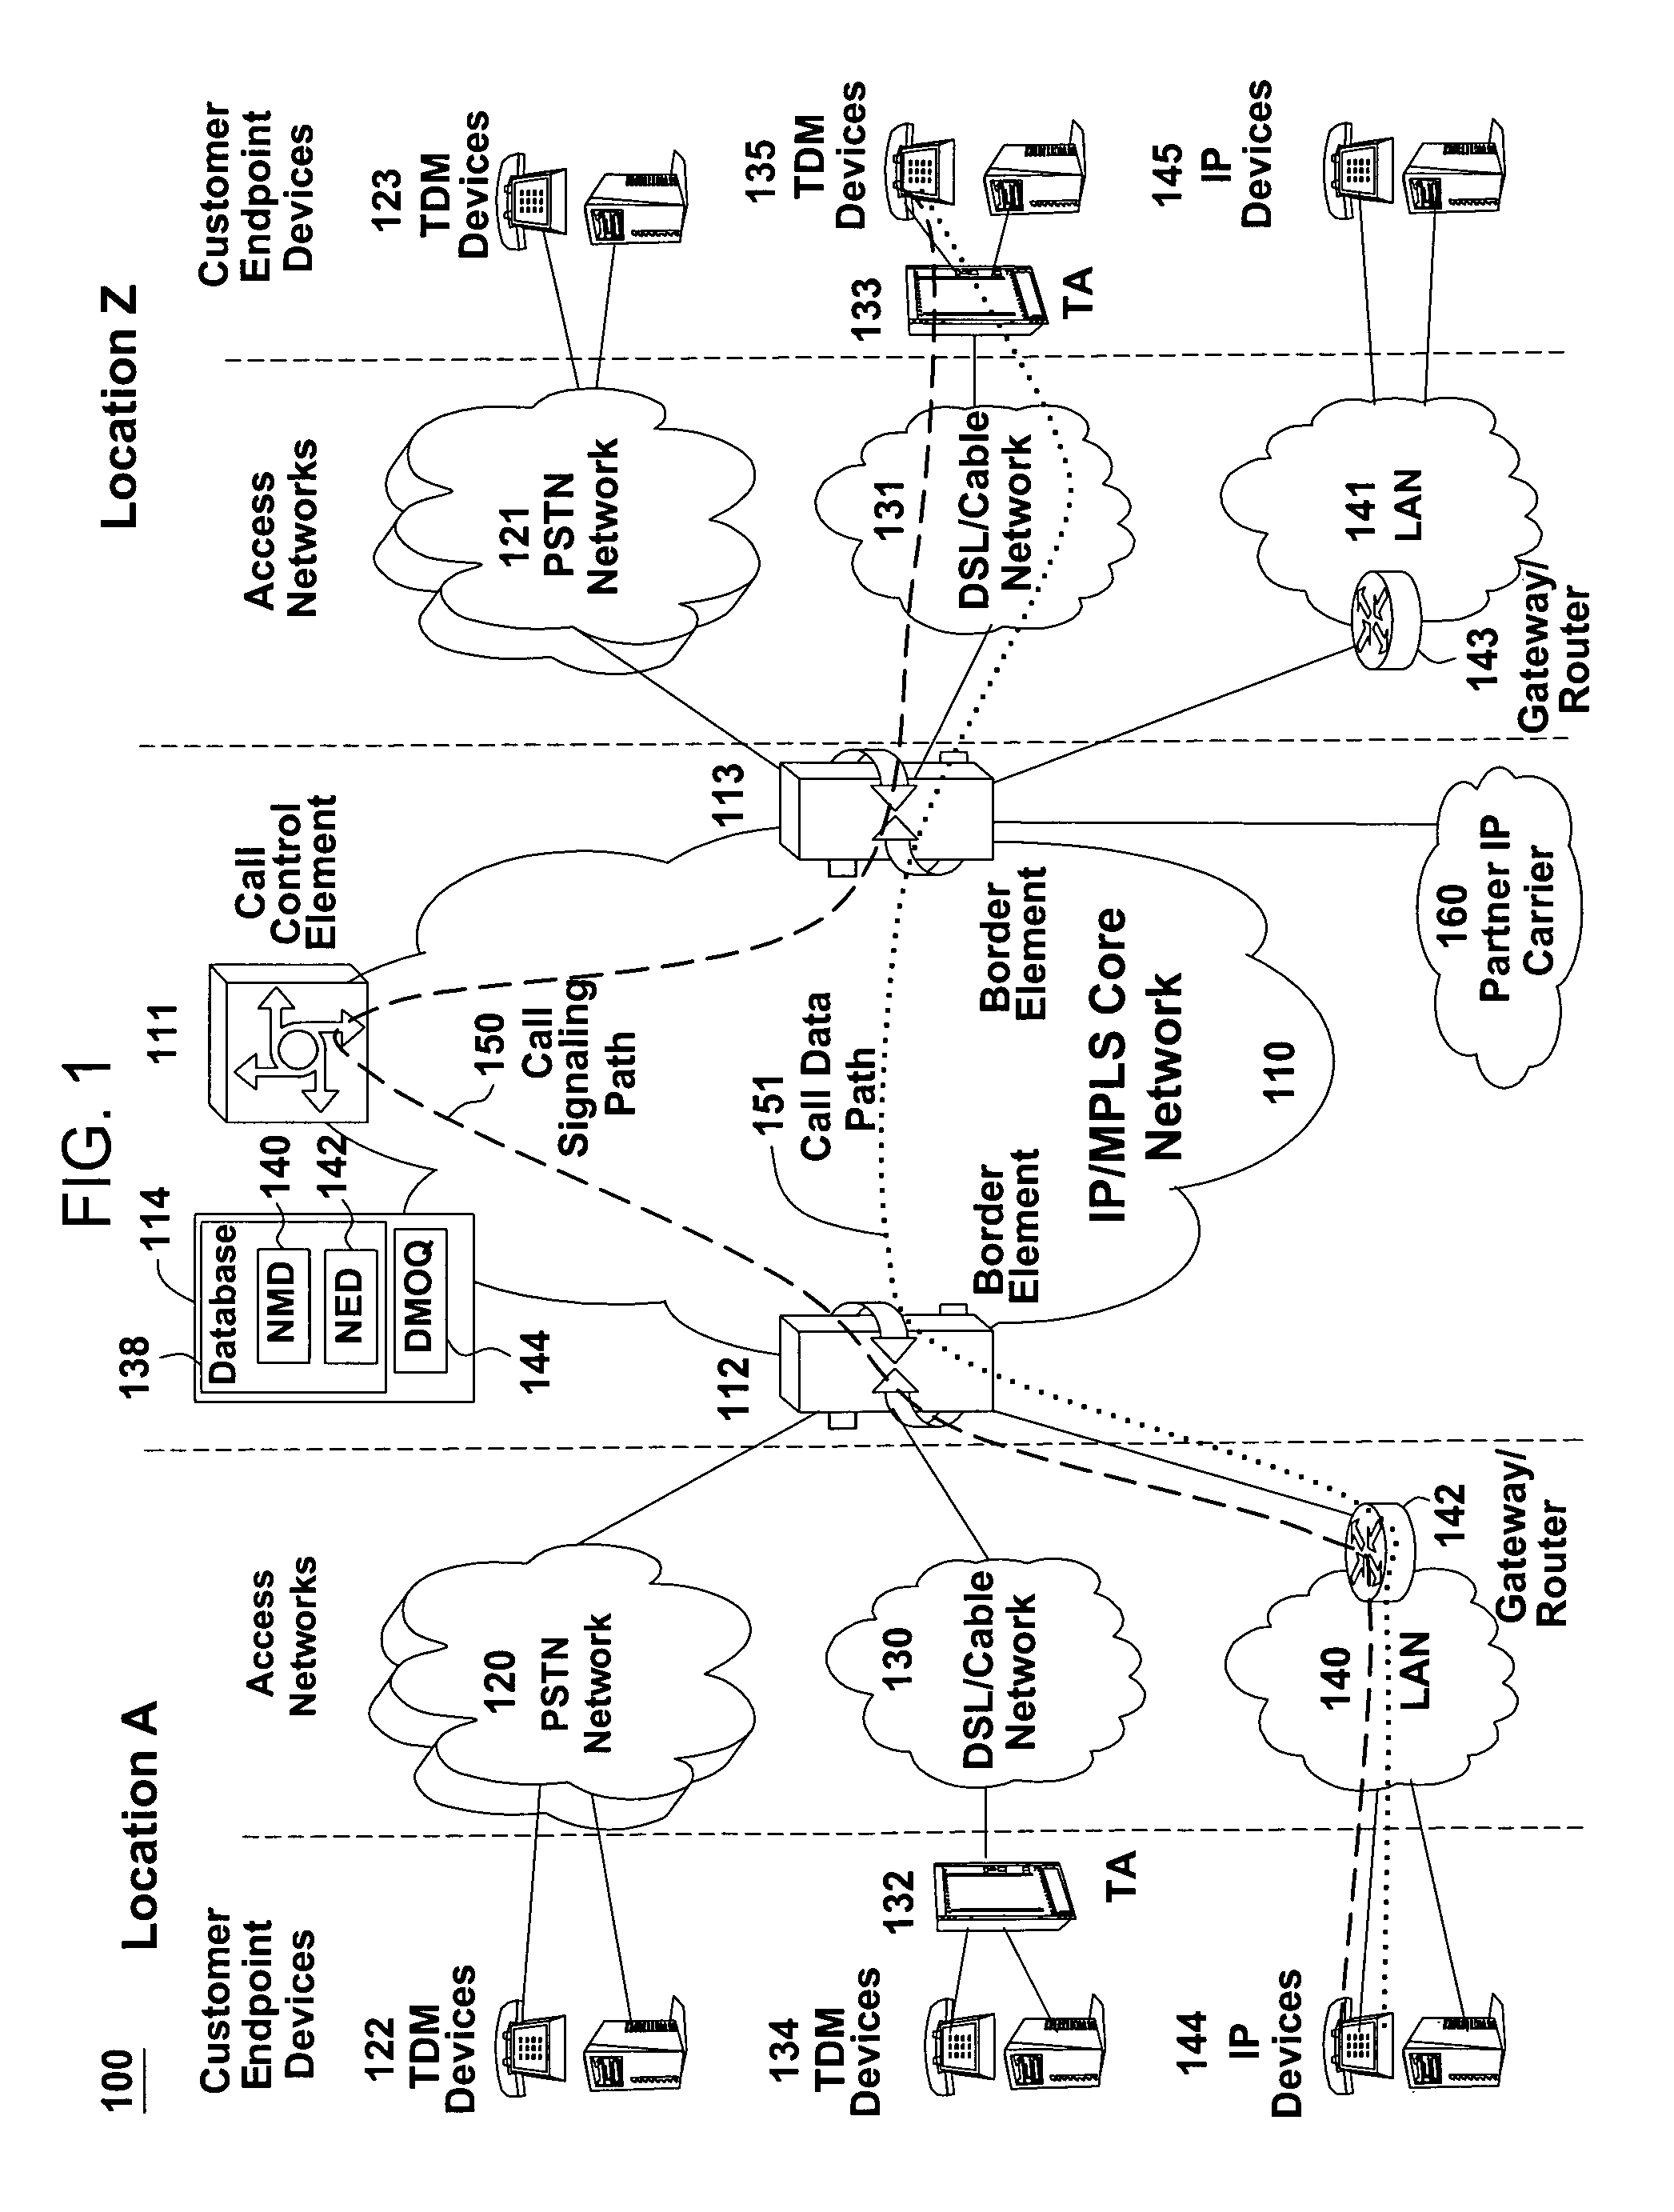 Method and apparatus for determining a direct measure of quality in a packet-switched network